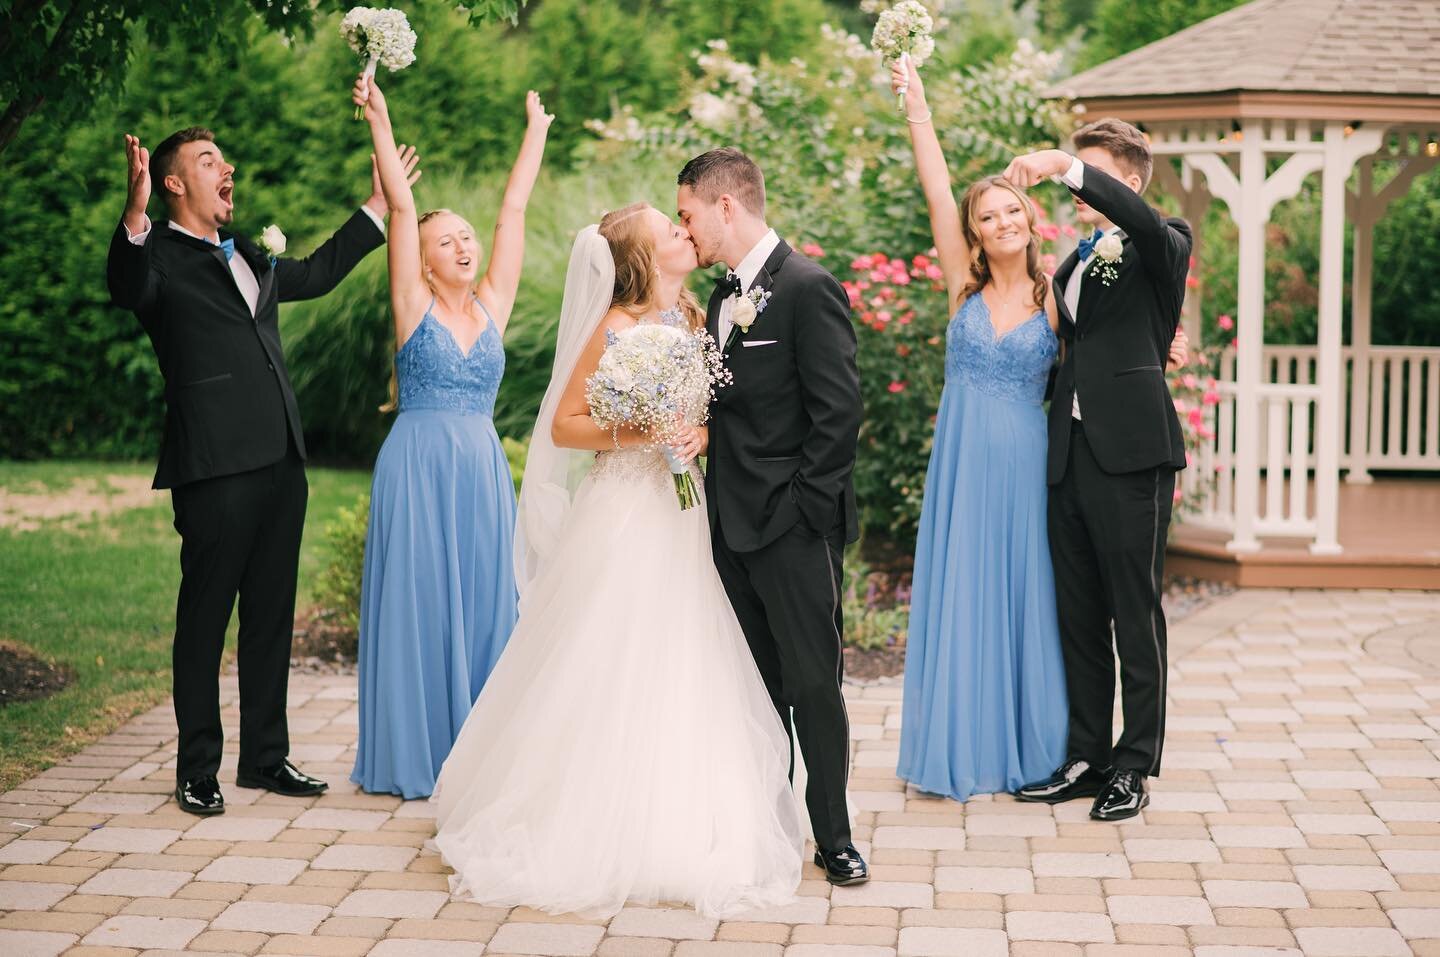 No better feeling than all your besties cheering you on after your wedding 🎊🎉